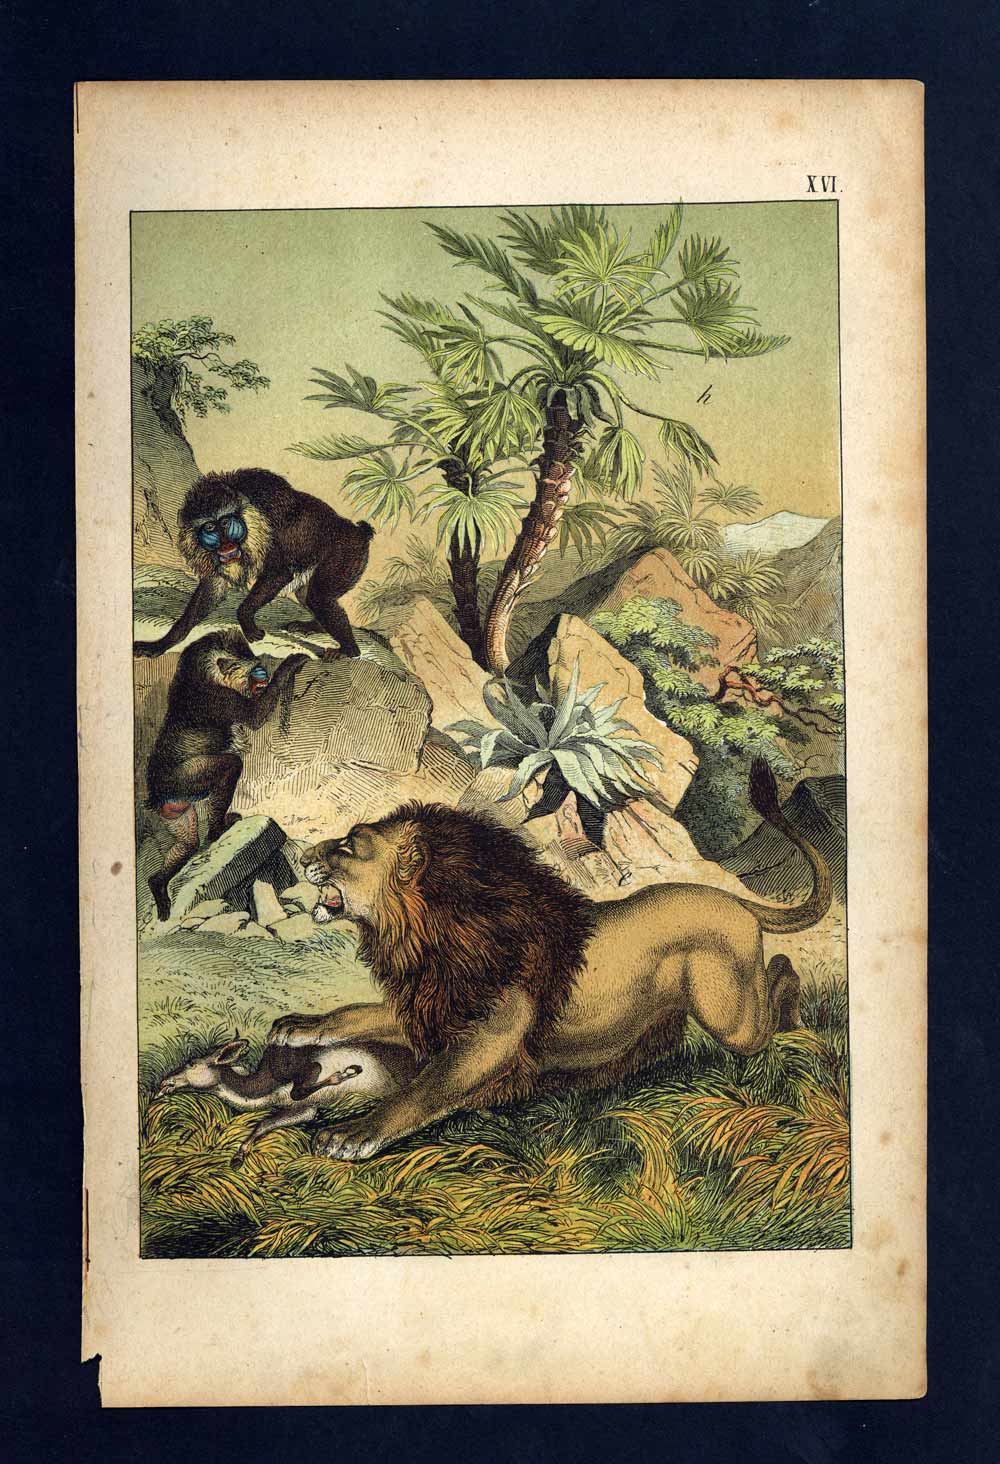 THE MANDRILL, THE LION, DWARF PALM TREE engraving print illustration from 1880 